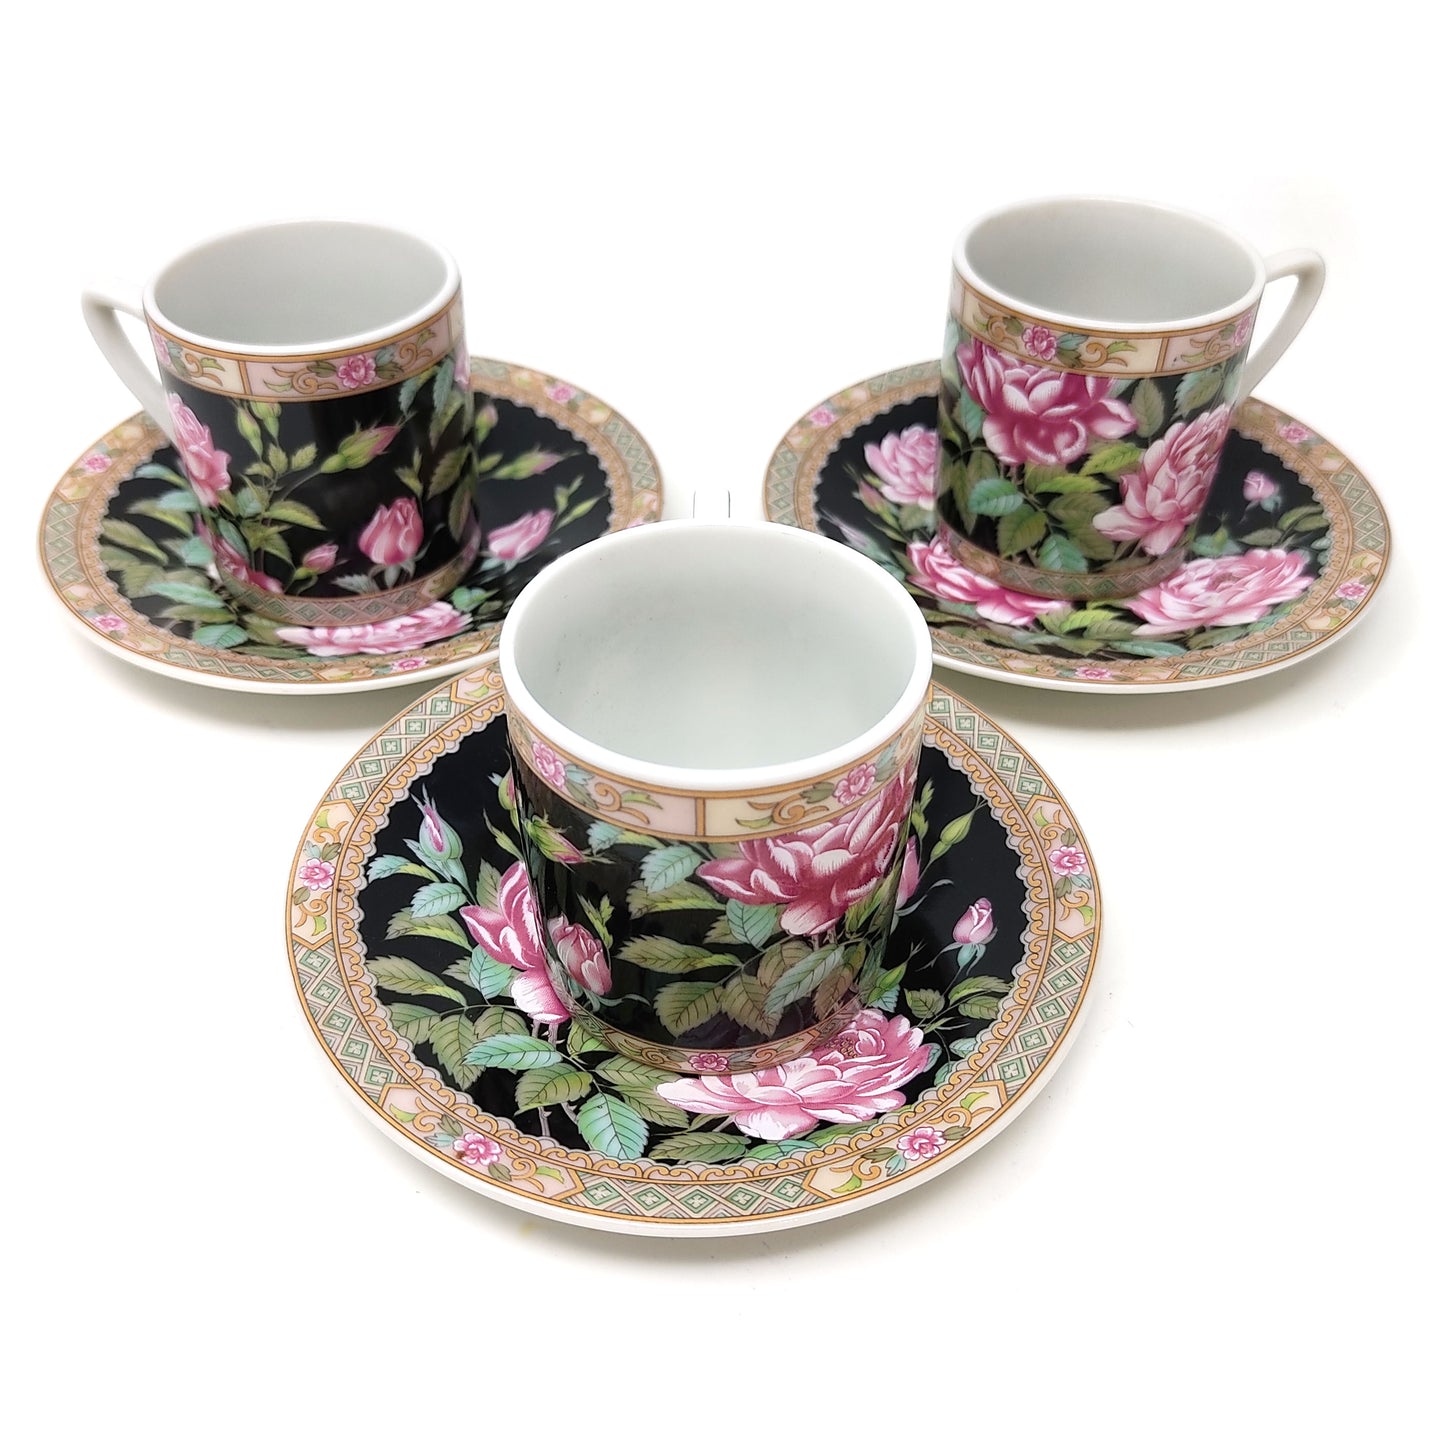 Lefton China Demitasse Cup and Saucer Set of 3 Exclusives Japan Black with Peony